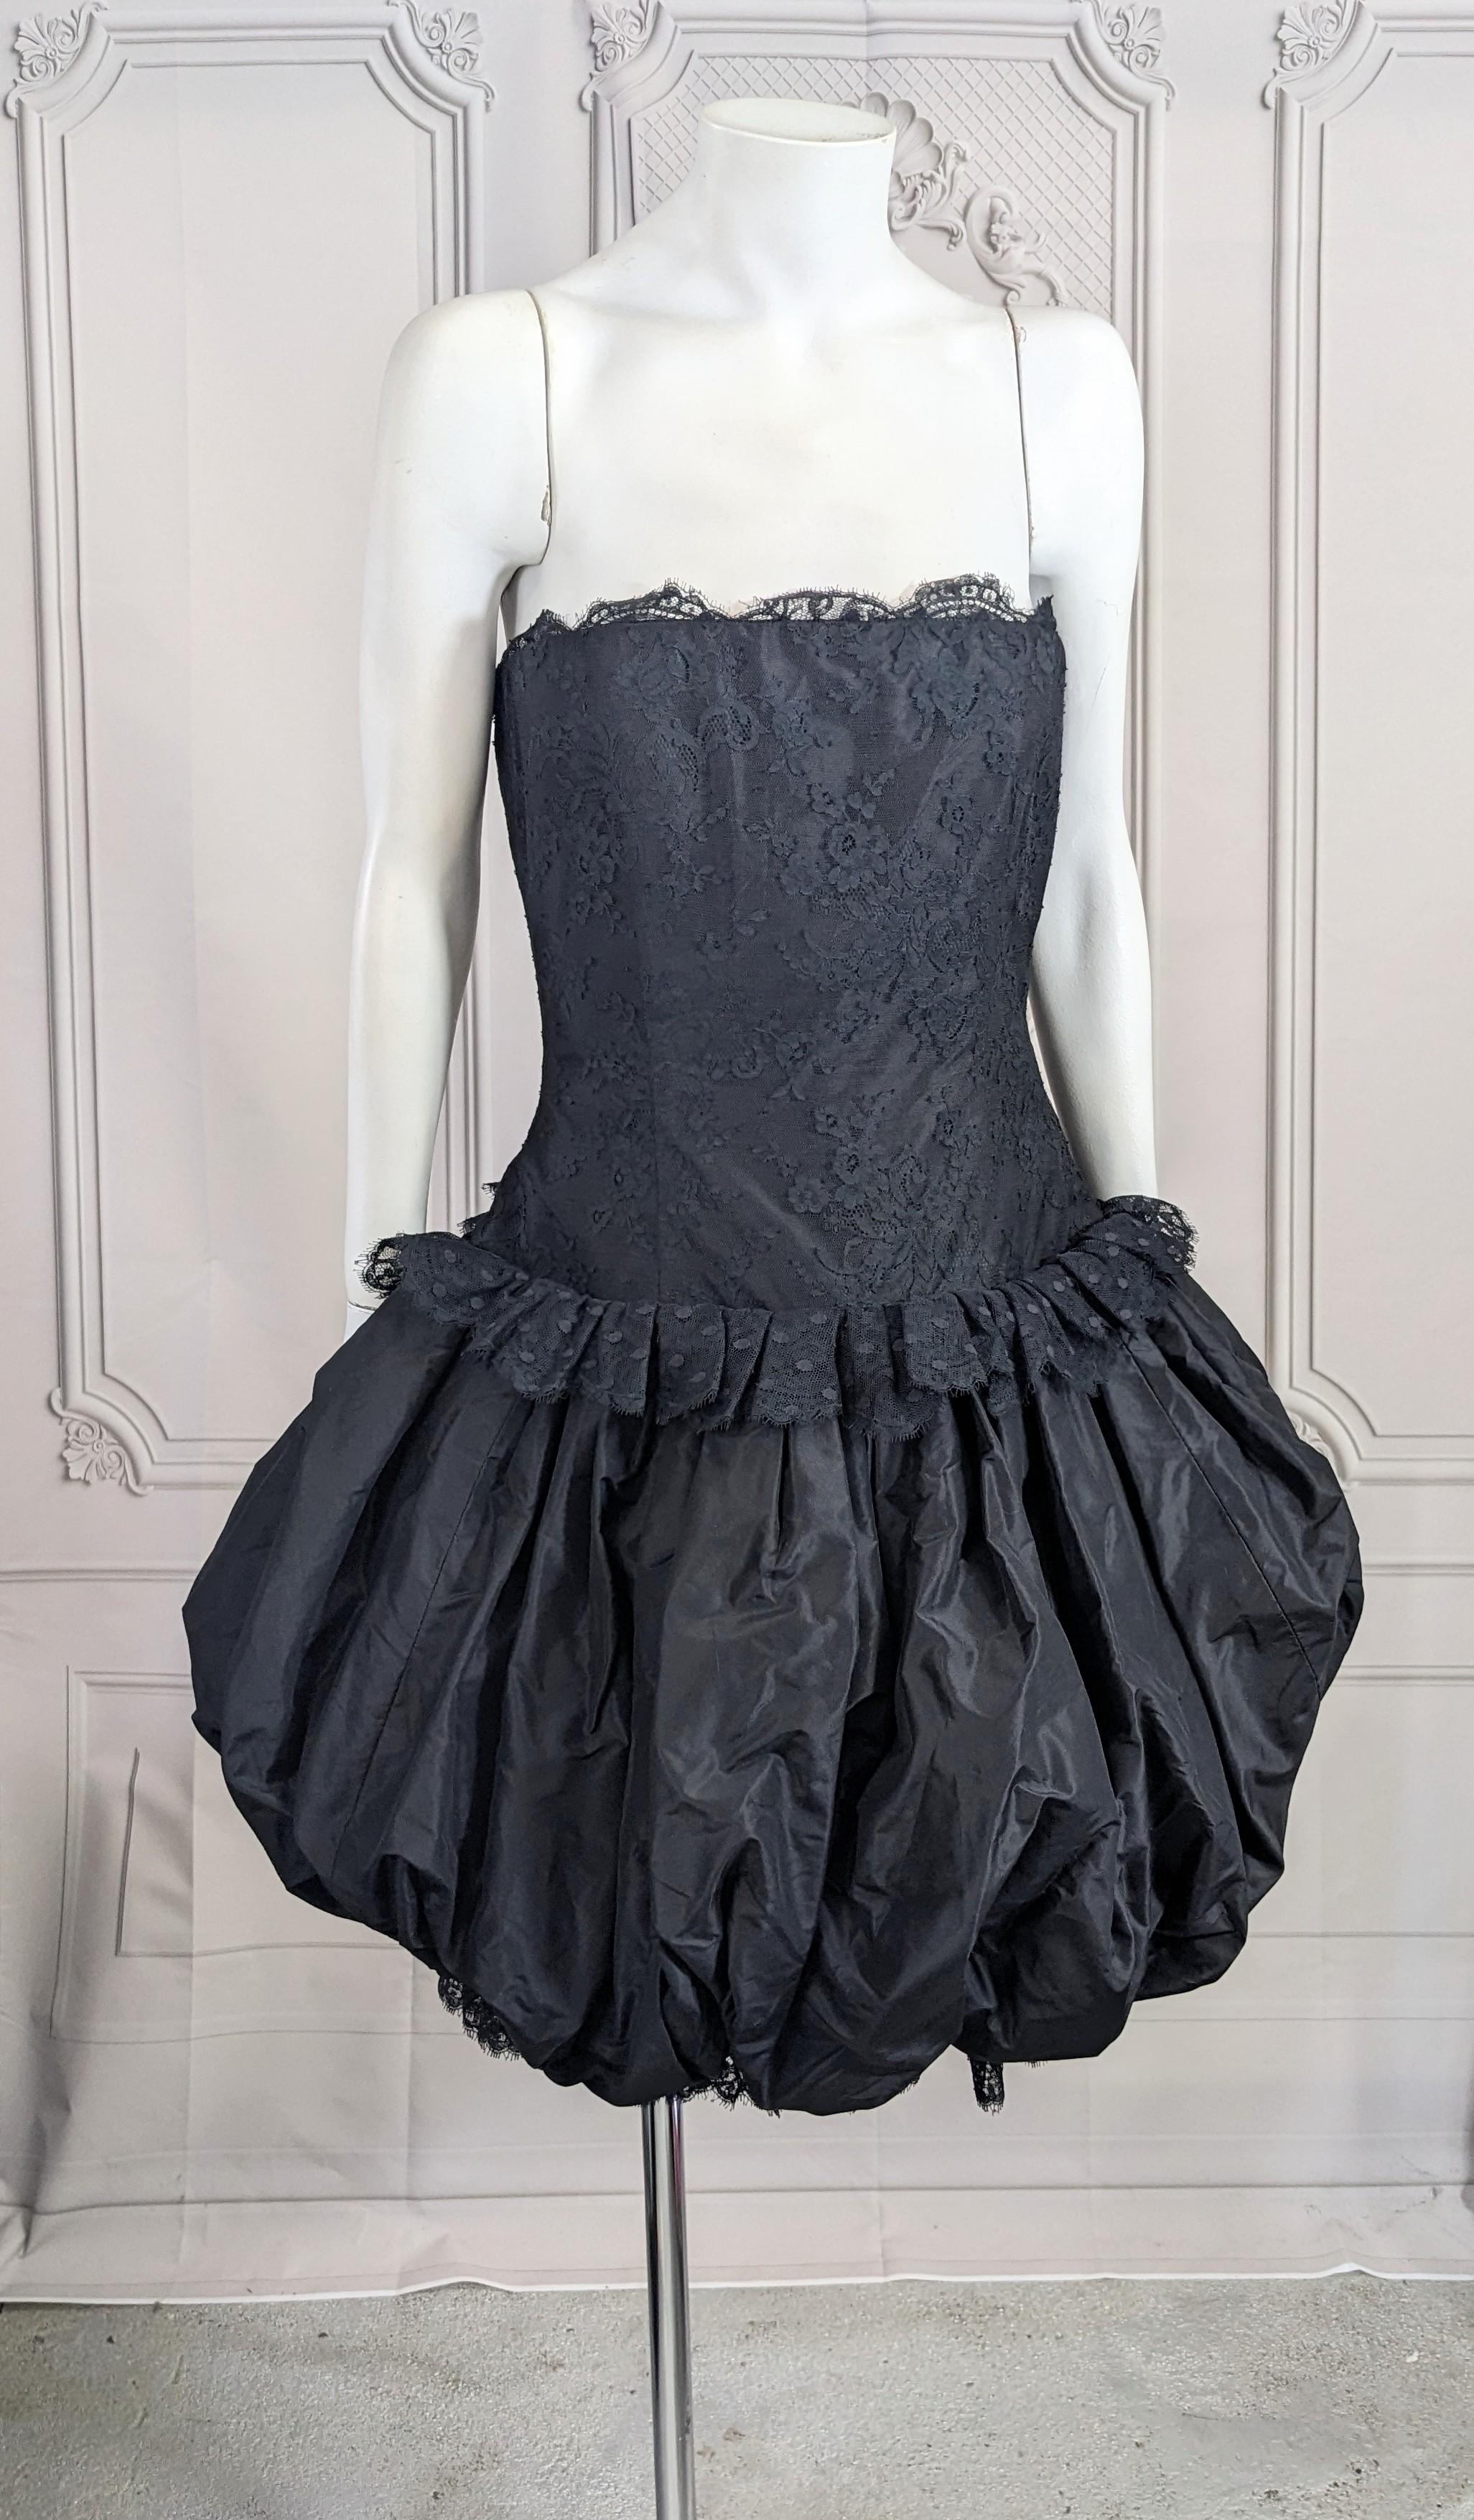 Charming Bill Blass Strapless Lace, Point D'esprit and Taffeta Bubble Cocktail Dress from the 1980's. Corset is overlaid and trimmed in lace. Point D'esprit ruffle at hip which releases to huge silk taffeta bubble skirt anchored with another ruffle